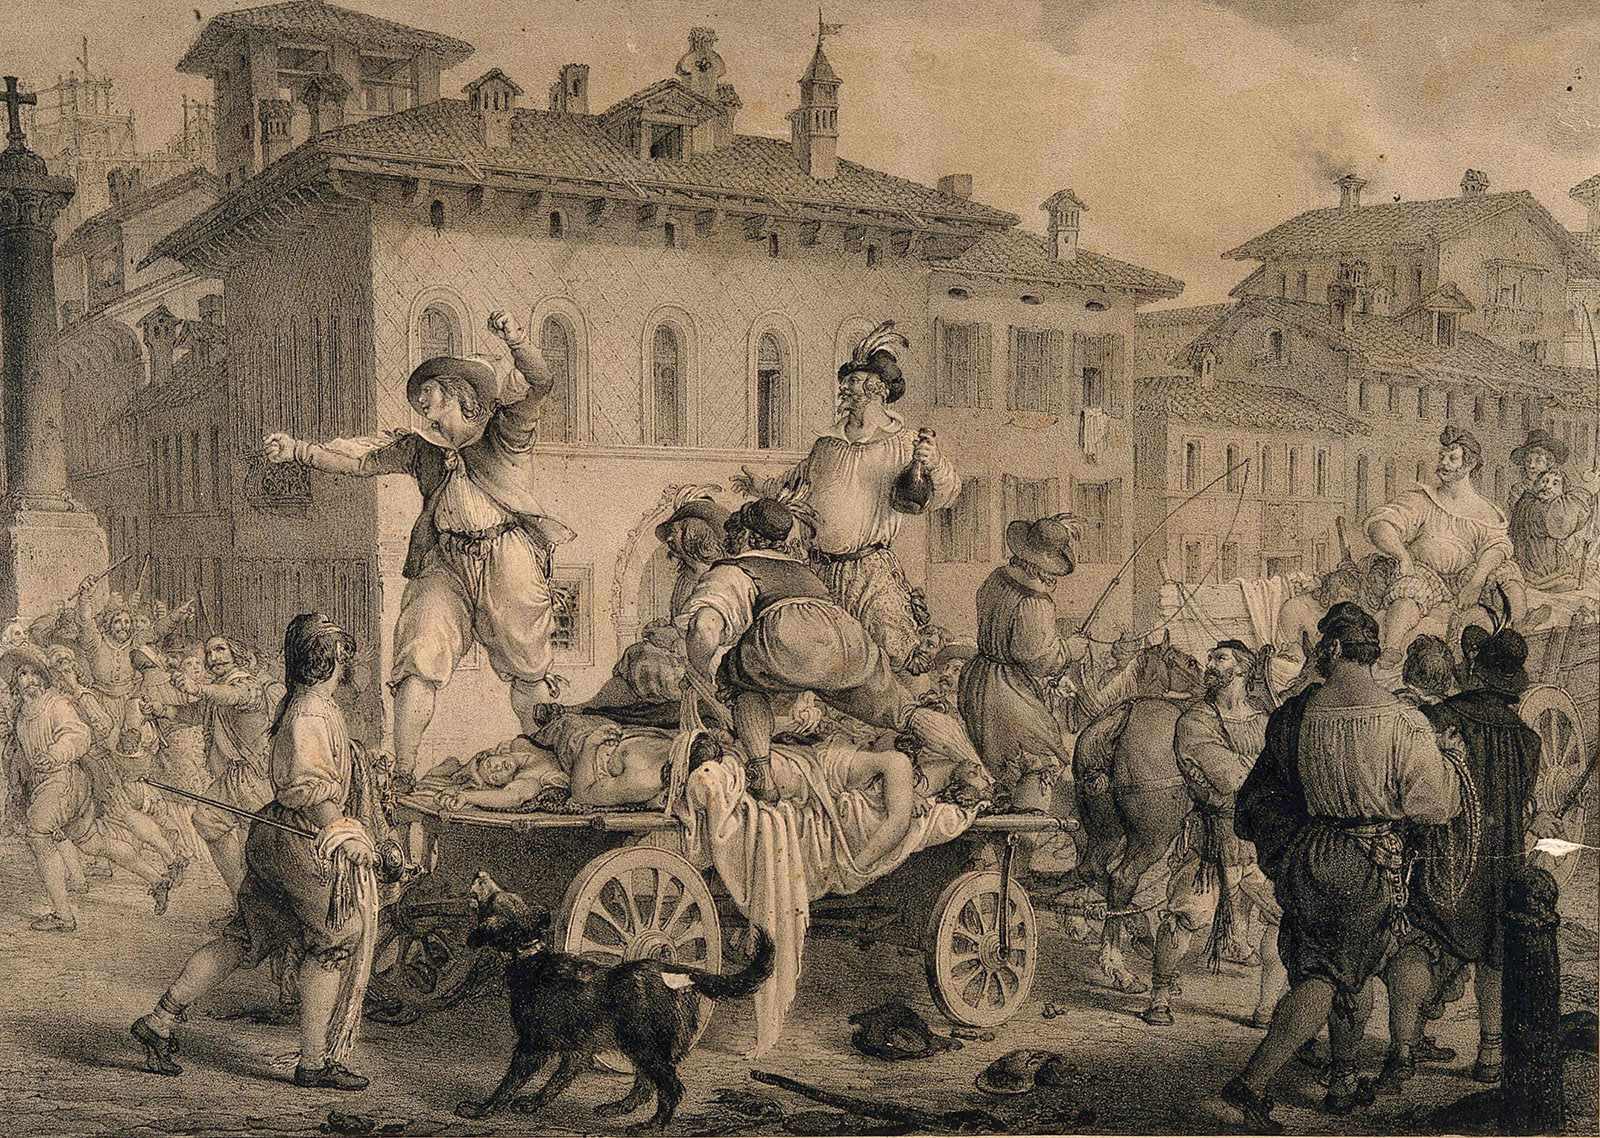 a lithograph of a scene from Alessandro Manzoni’s The Betrothed in which Renzo is accused of intentionally spreading the plague